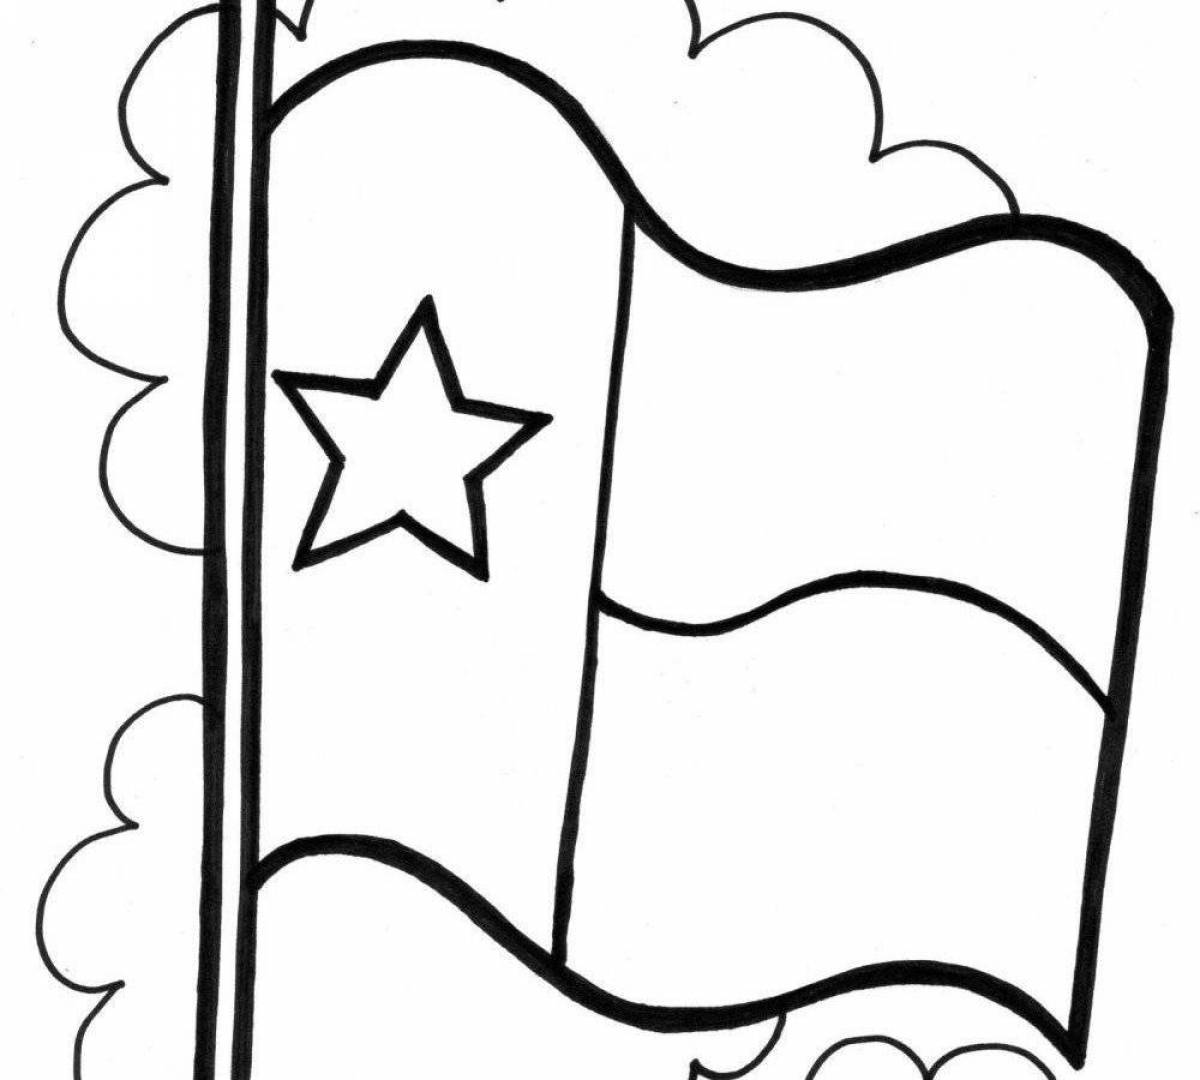 Intensive Russian flag coloring page